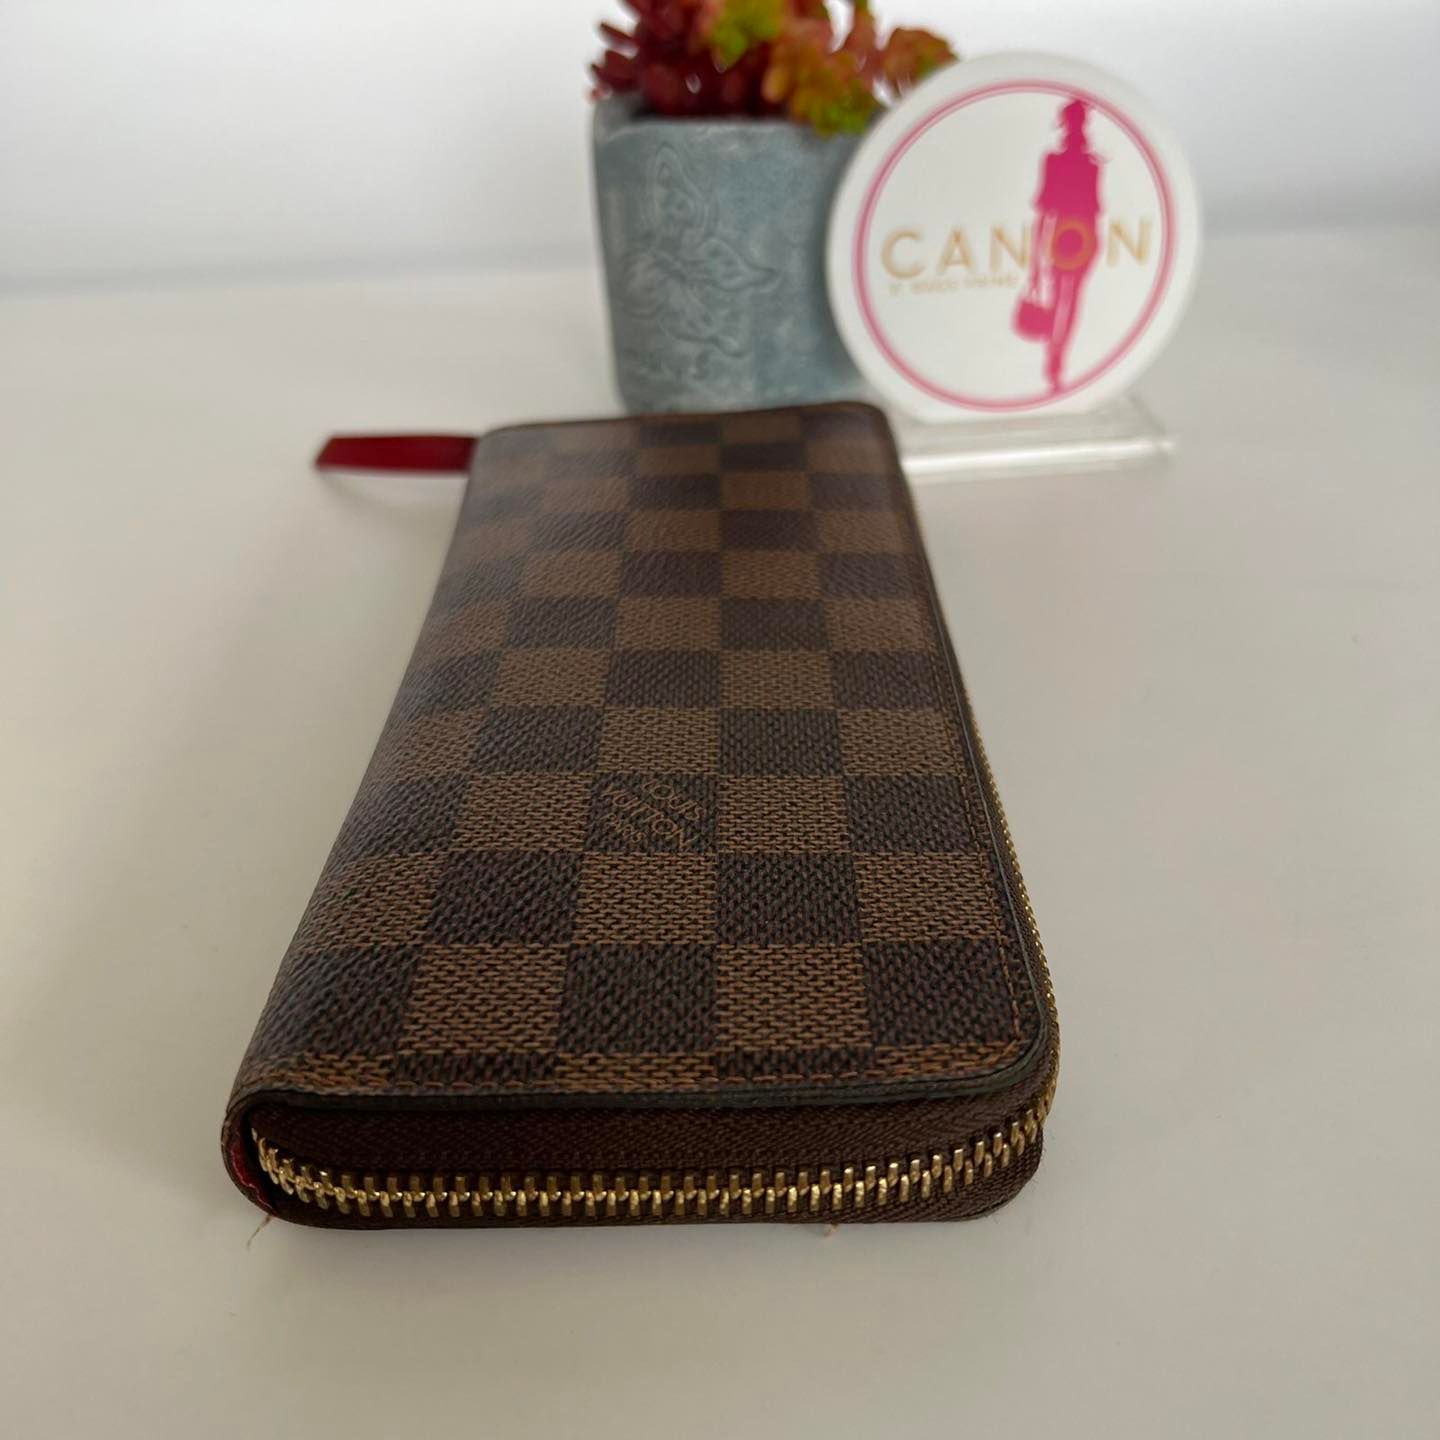 Louis Vuitton Damier Ebene Clemence Wallet. Red Interior. Made in France.  DC: SF4129